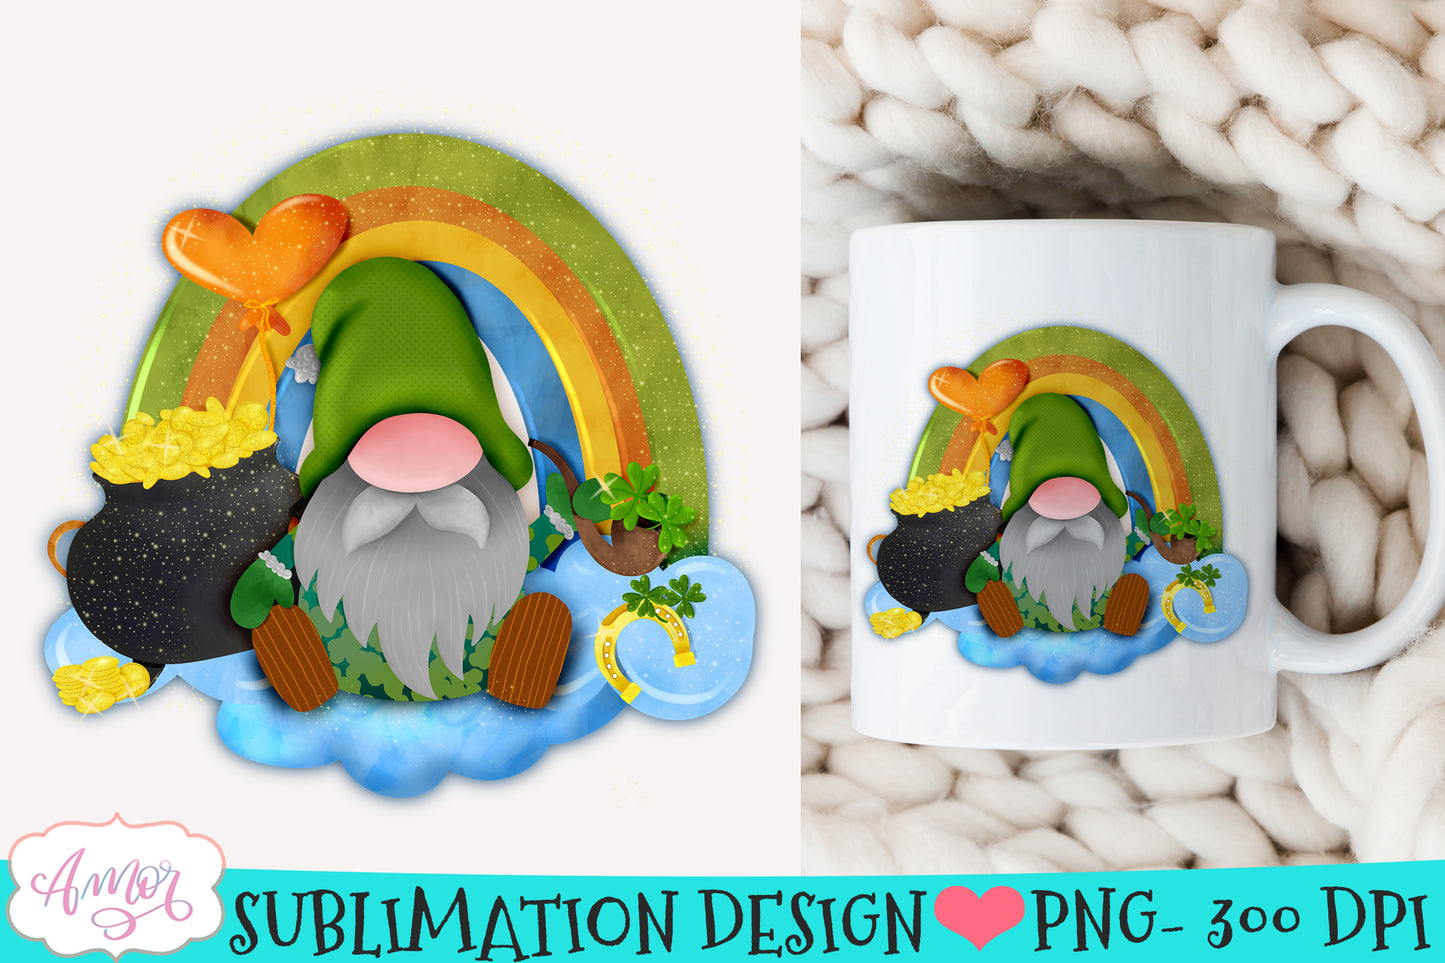 St. Patrick's Day gnome design for Sublimation